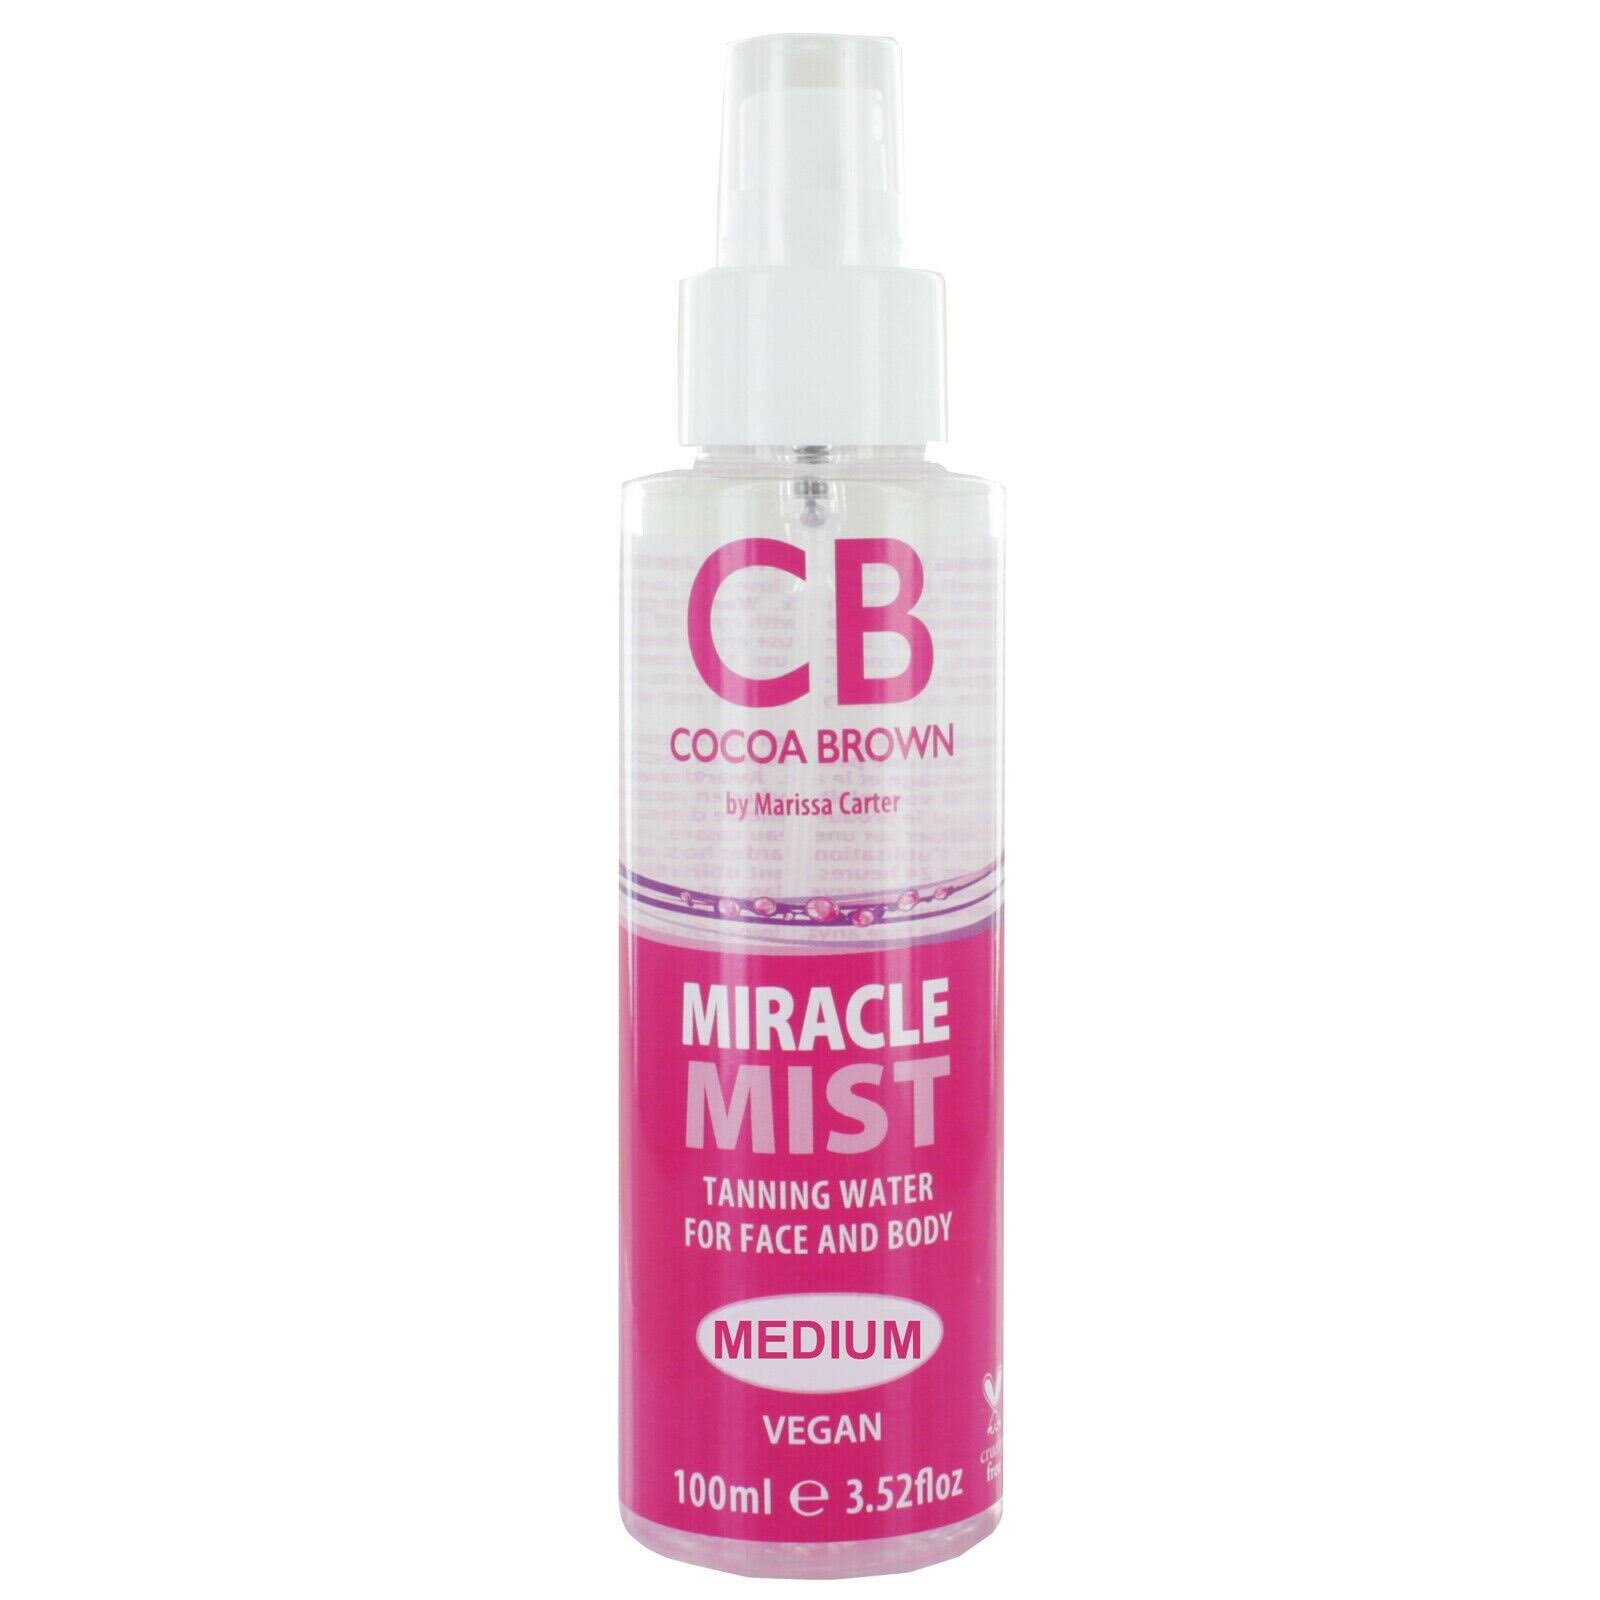 Cocoa Brown Miracle Mist Tanning Water - Medium (100ml)